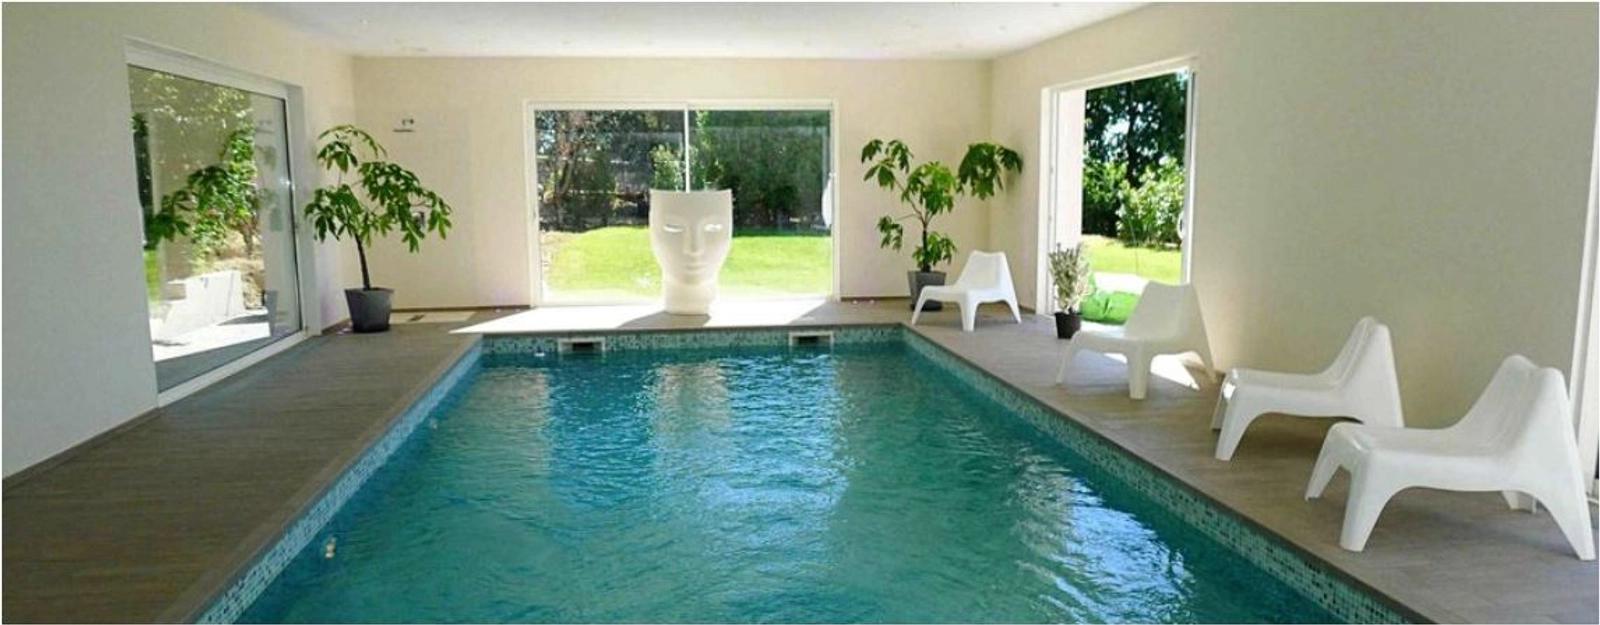 Space Space and privacy" villa with indoor pool - 1